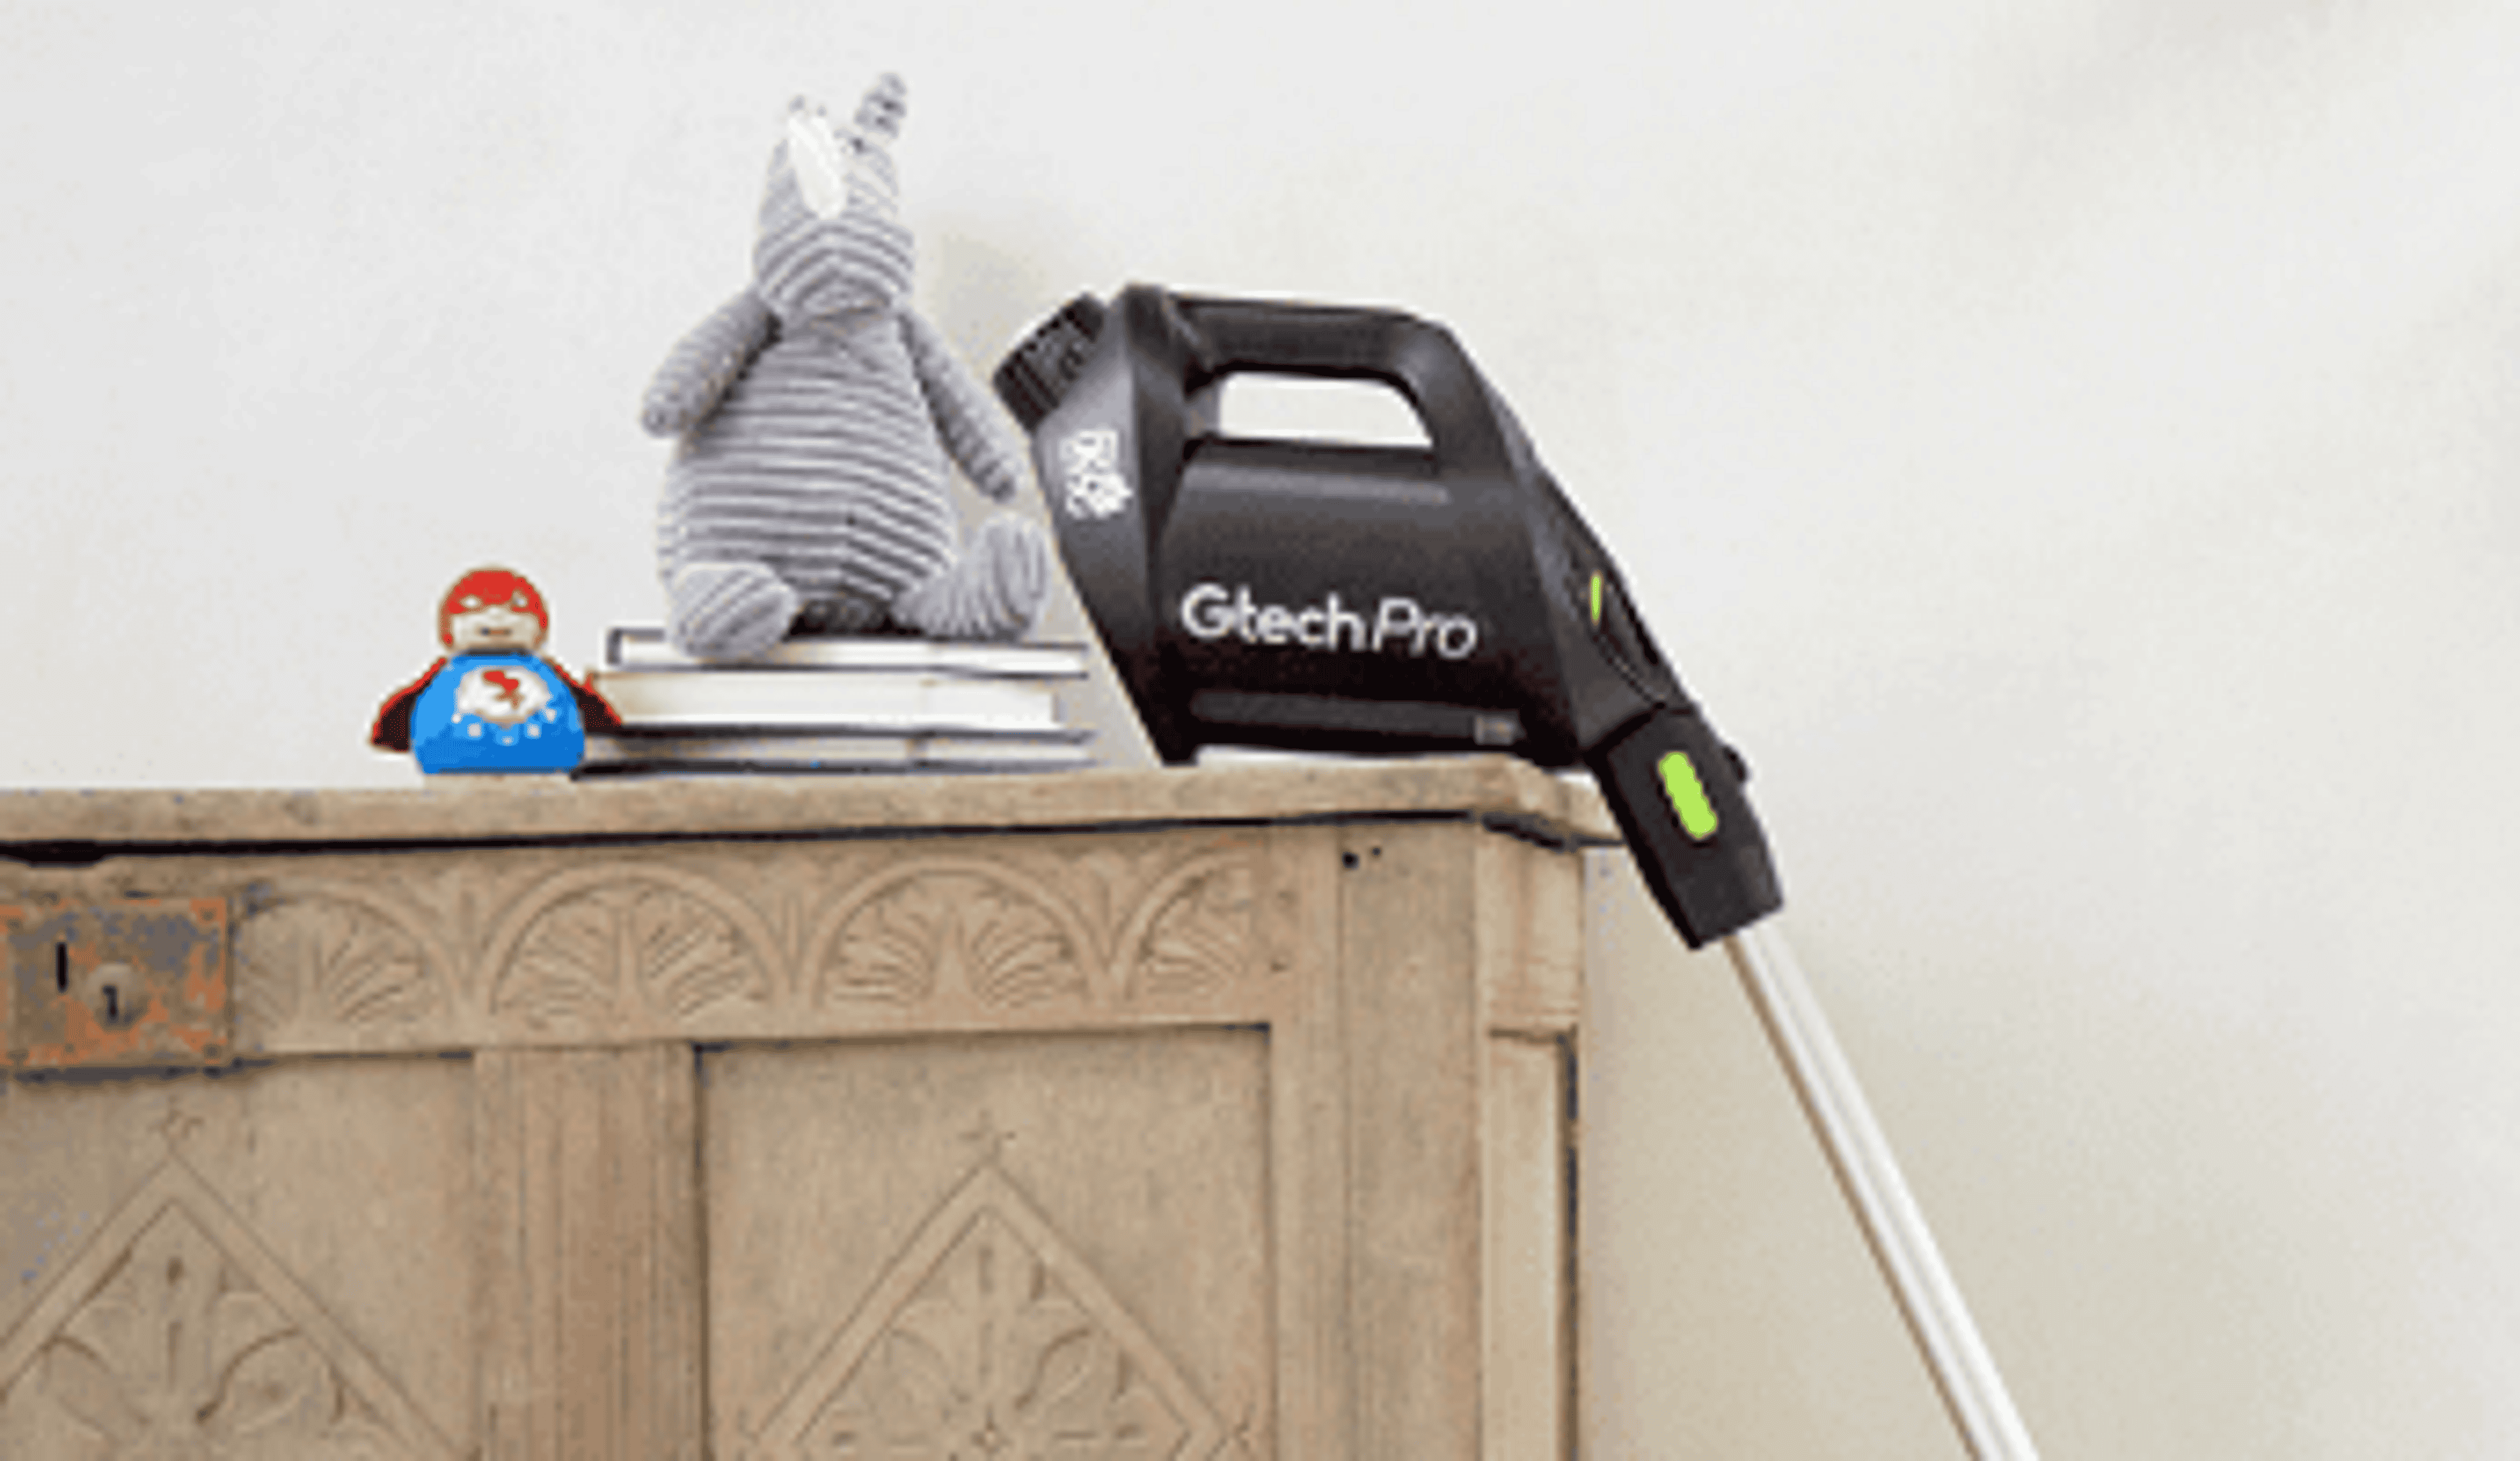  A Gtech stick vacuum resting against a wooden sideboard 